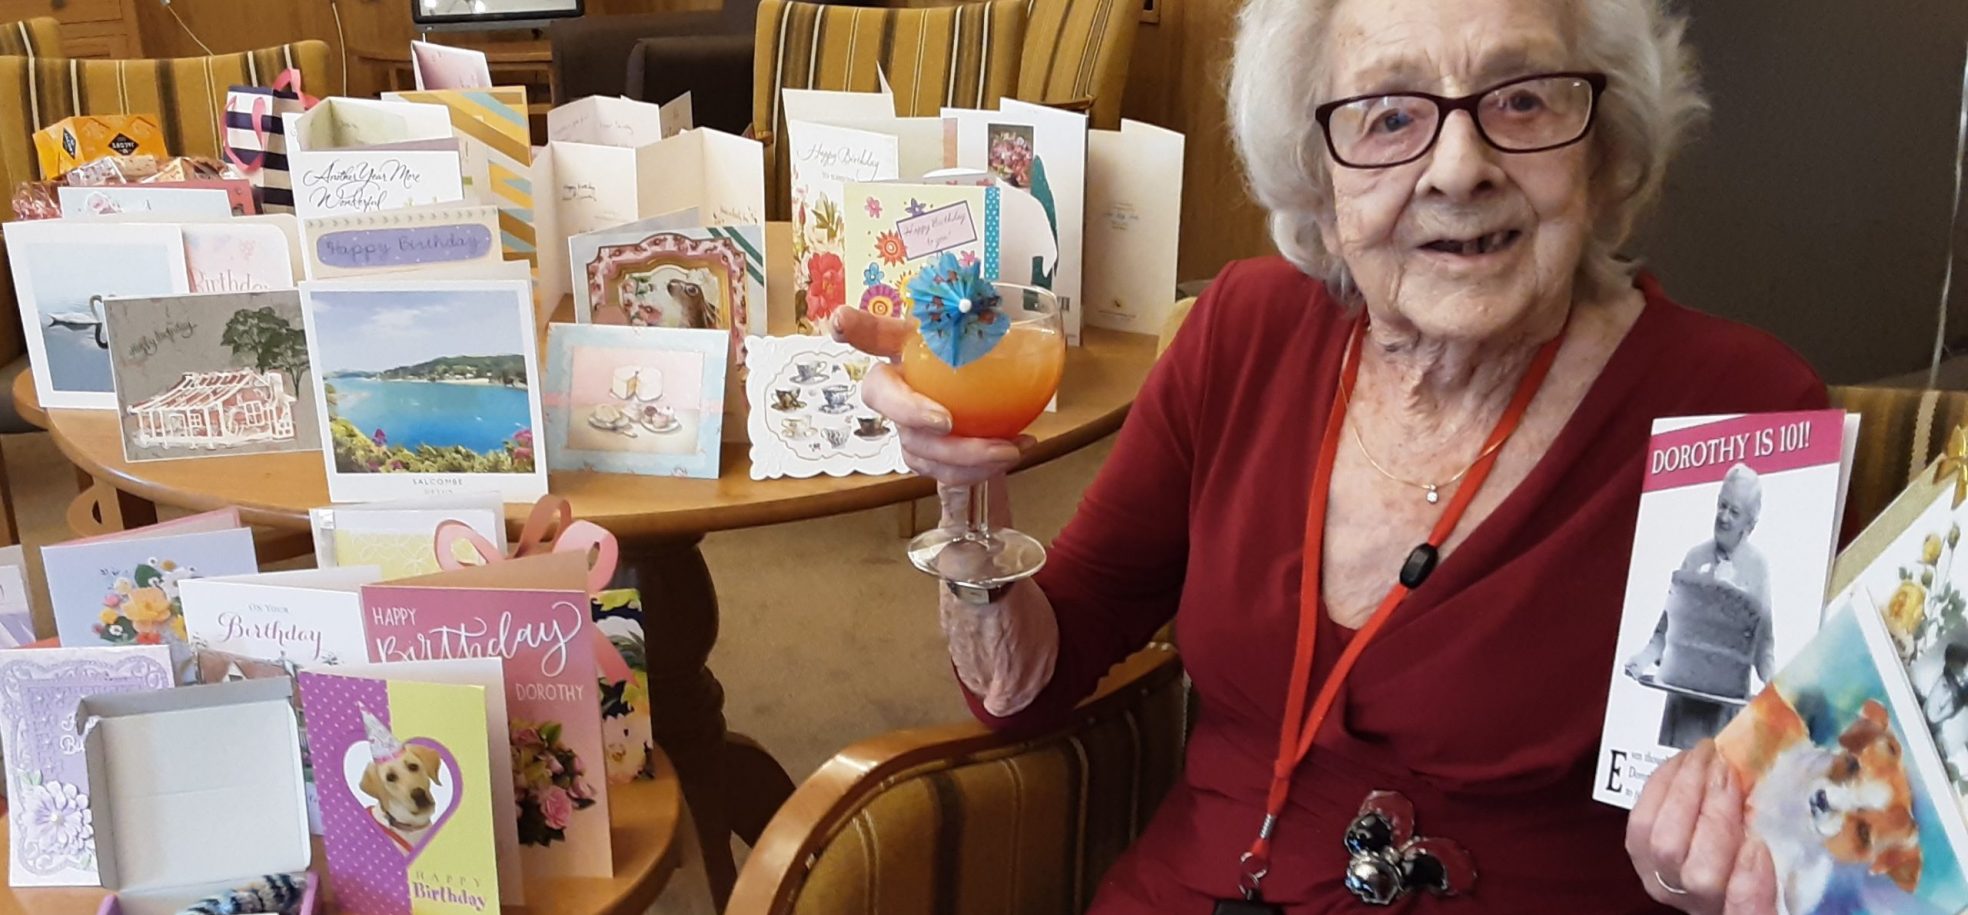 Cornwallis Court resident, Dorothy Crane, celebrates her 101st birthday at the Home with 101 birthday cards from family and friends